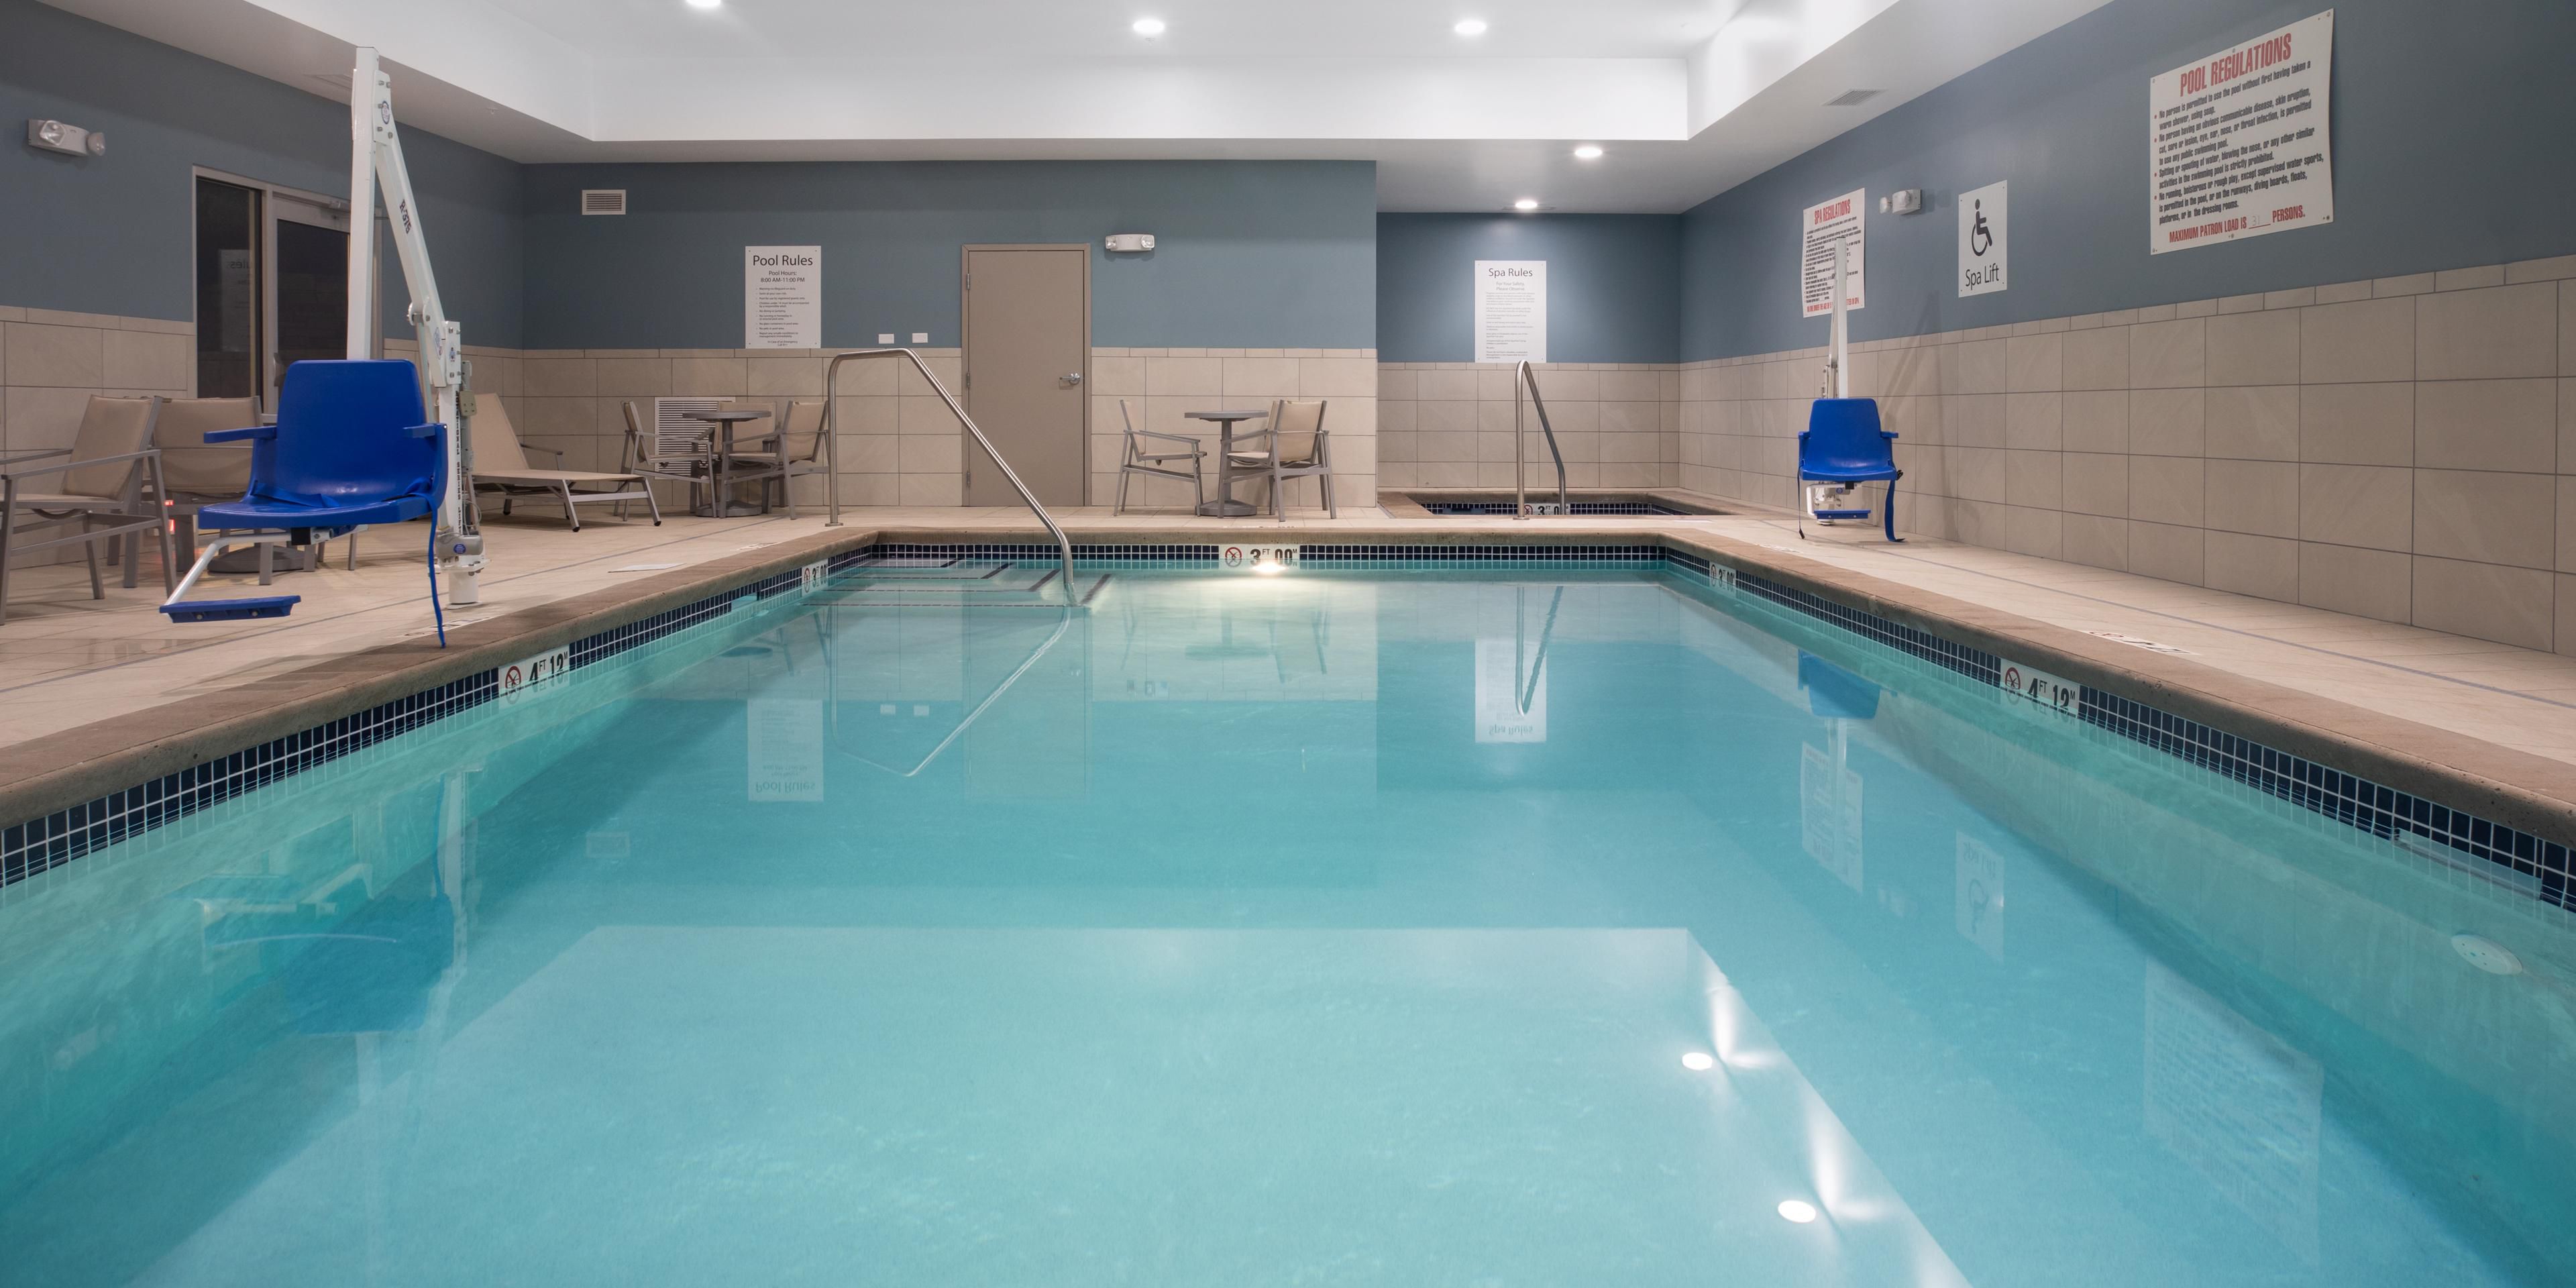 Enjoy our indoor pool and hot tub while in town to exercise, have fun with the family, or just relax.  It's the perfect remedy after a long day.